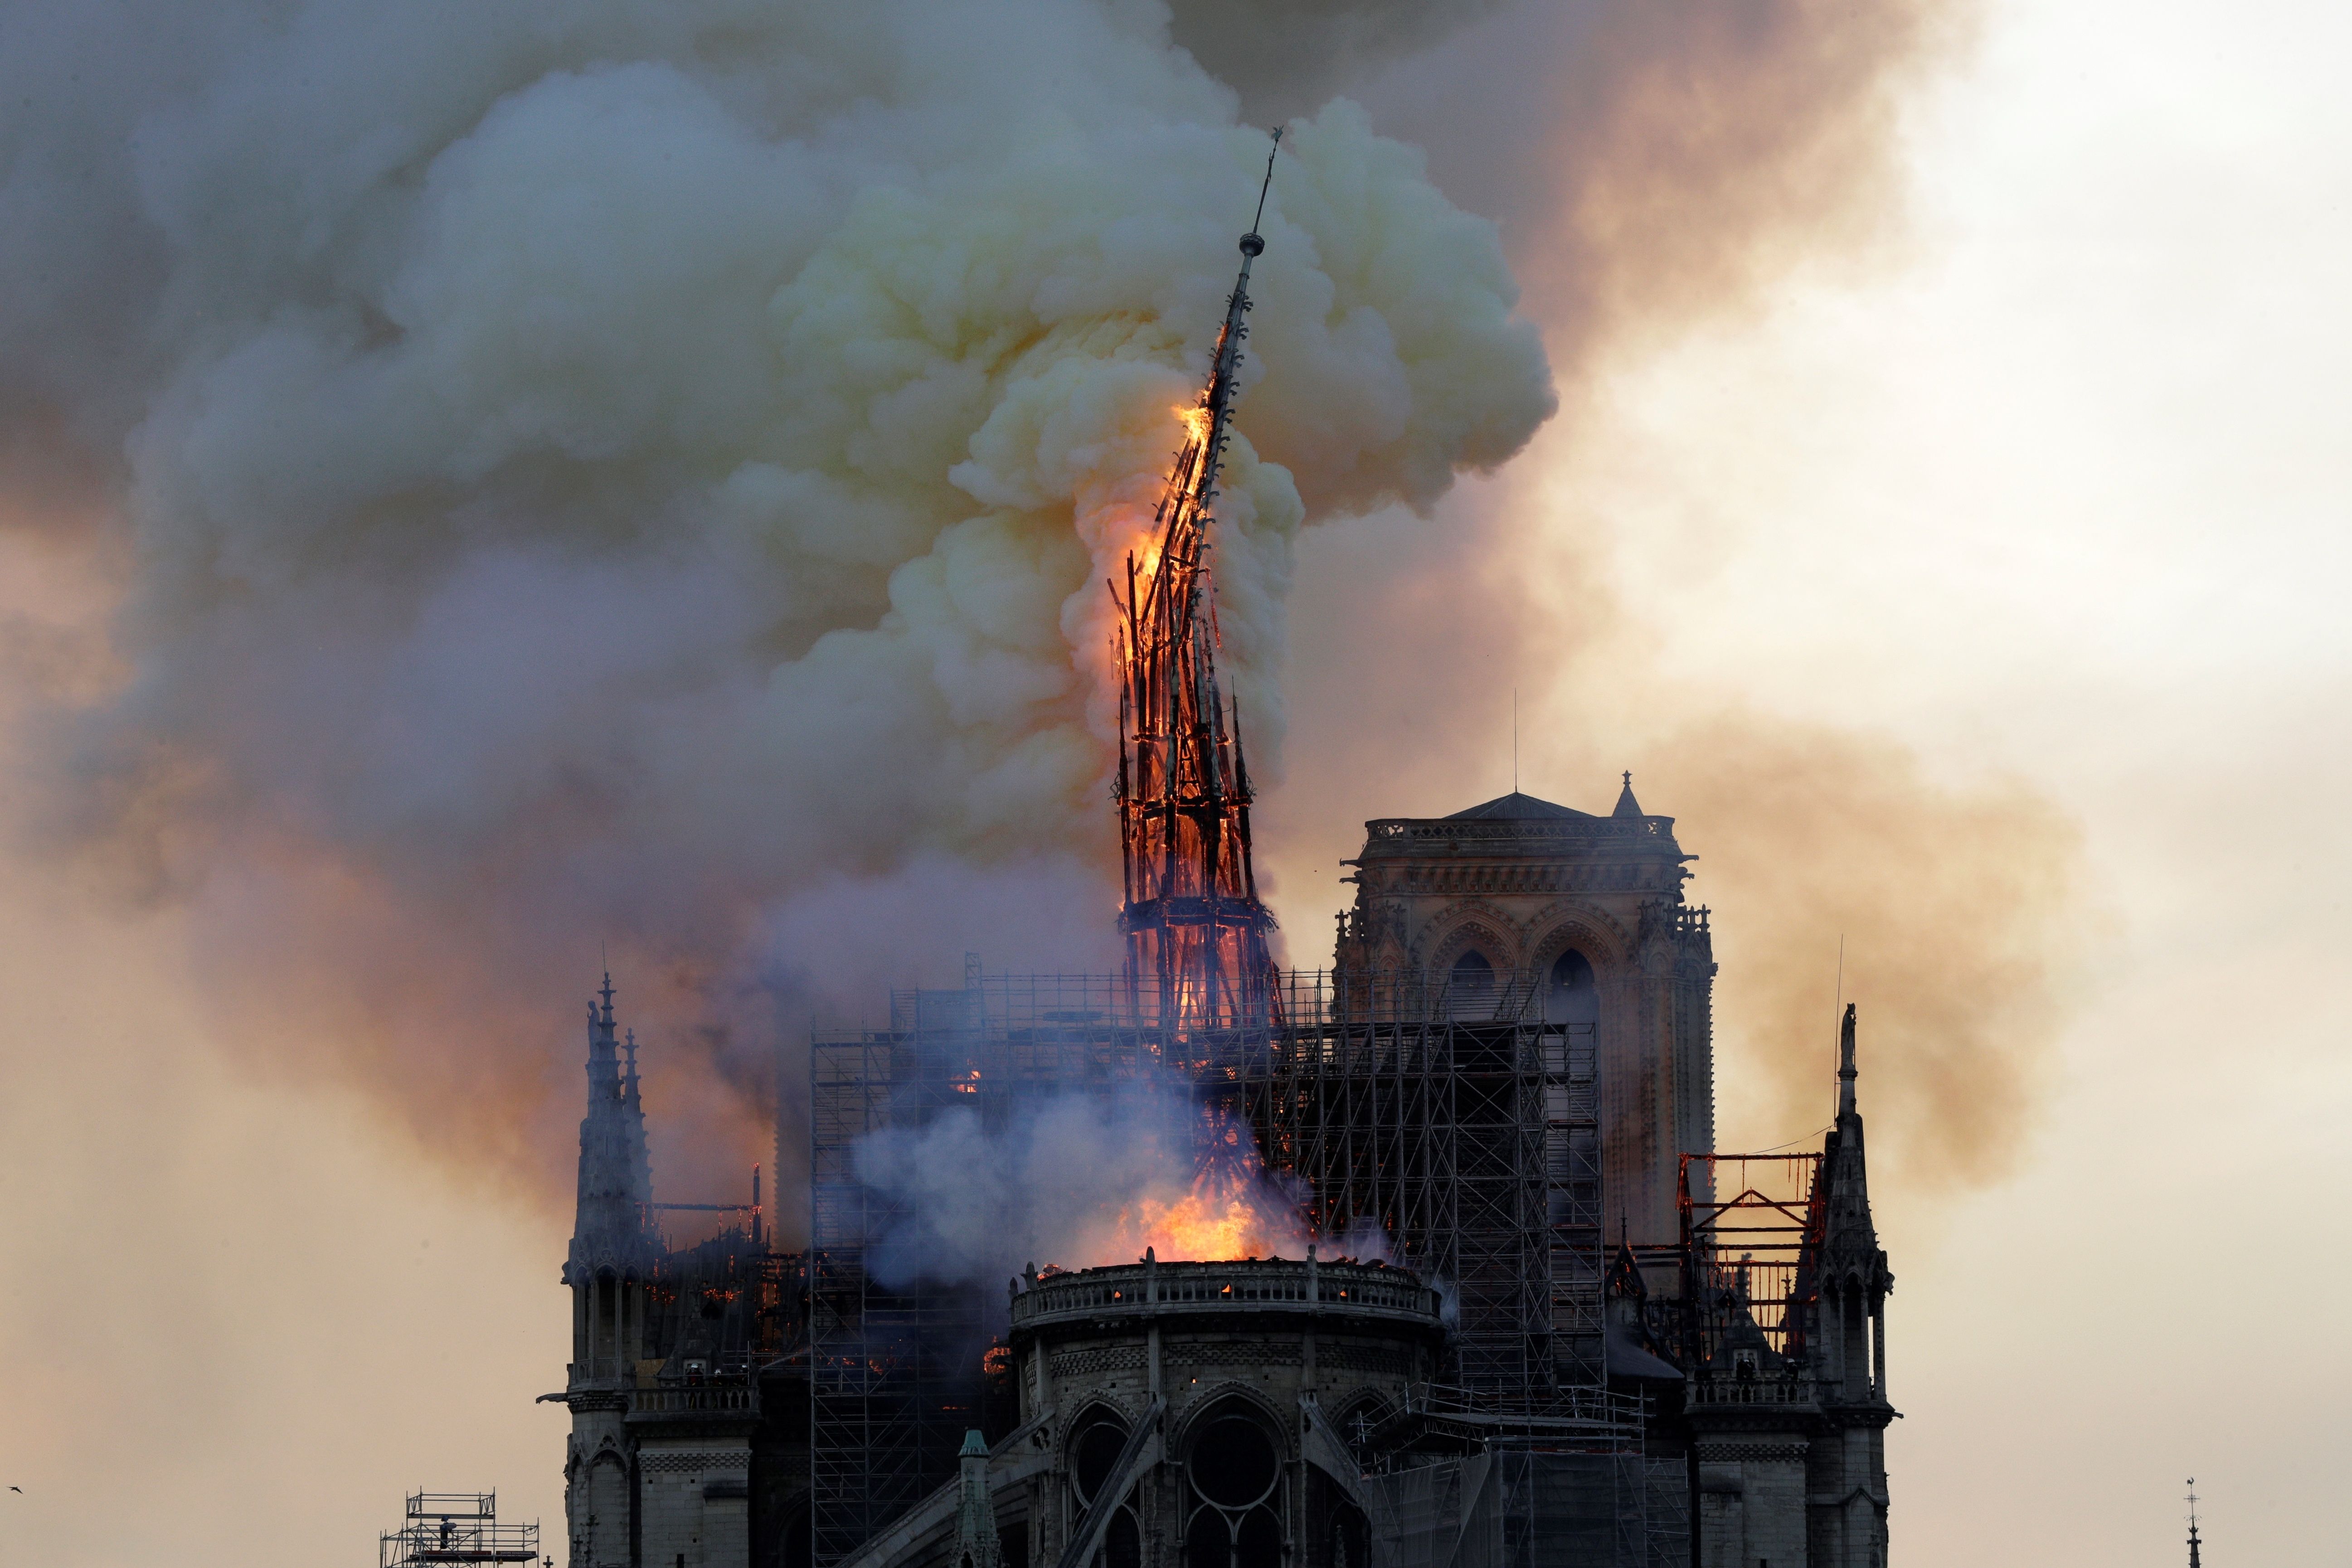 The steeple and spire of the landmark Notre-Dame Cathedral collapses as the cathedral is engulfed in flames in central Paris on April 15, 2019. (Photo by GEOFFROY VAN DER HASSELT/AFP via Getty Images)